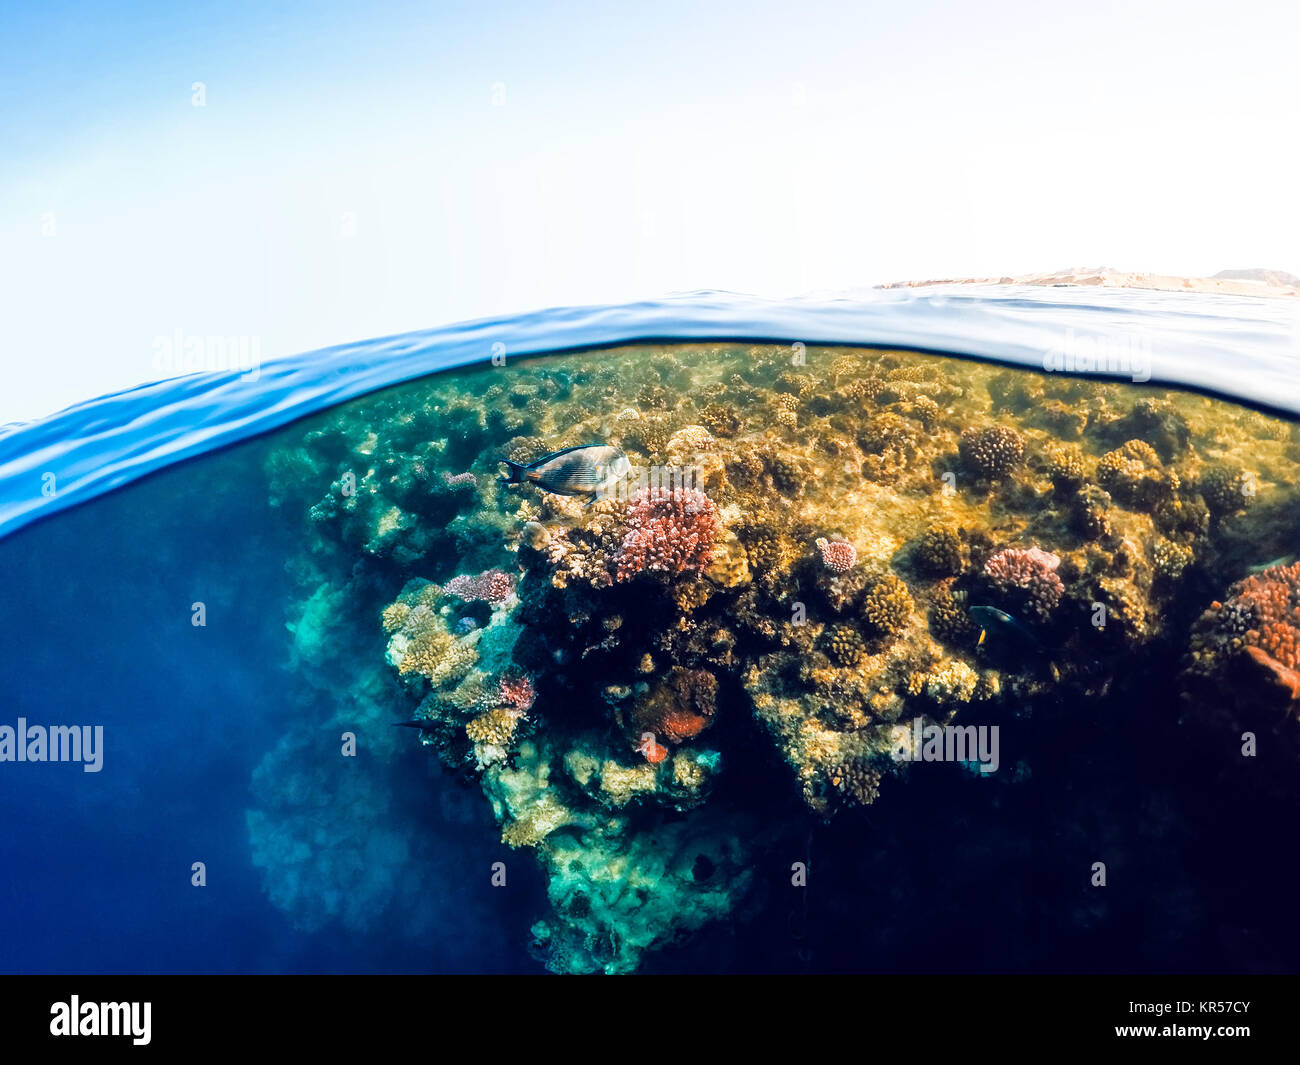 Underwater and surface split view in the tropics sea Stock Photo